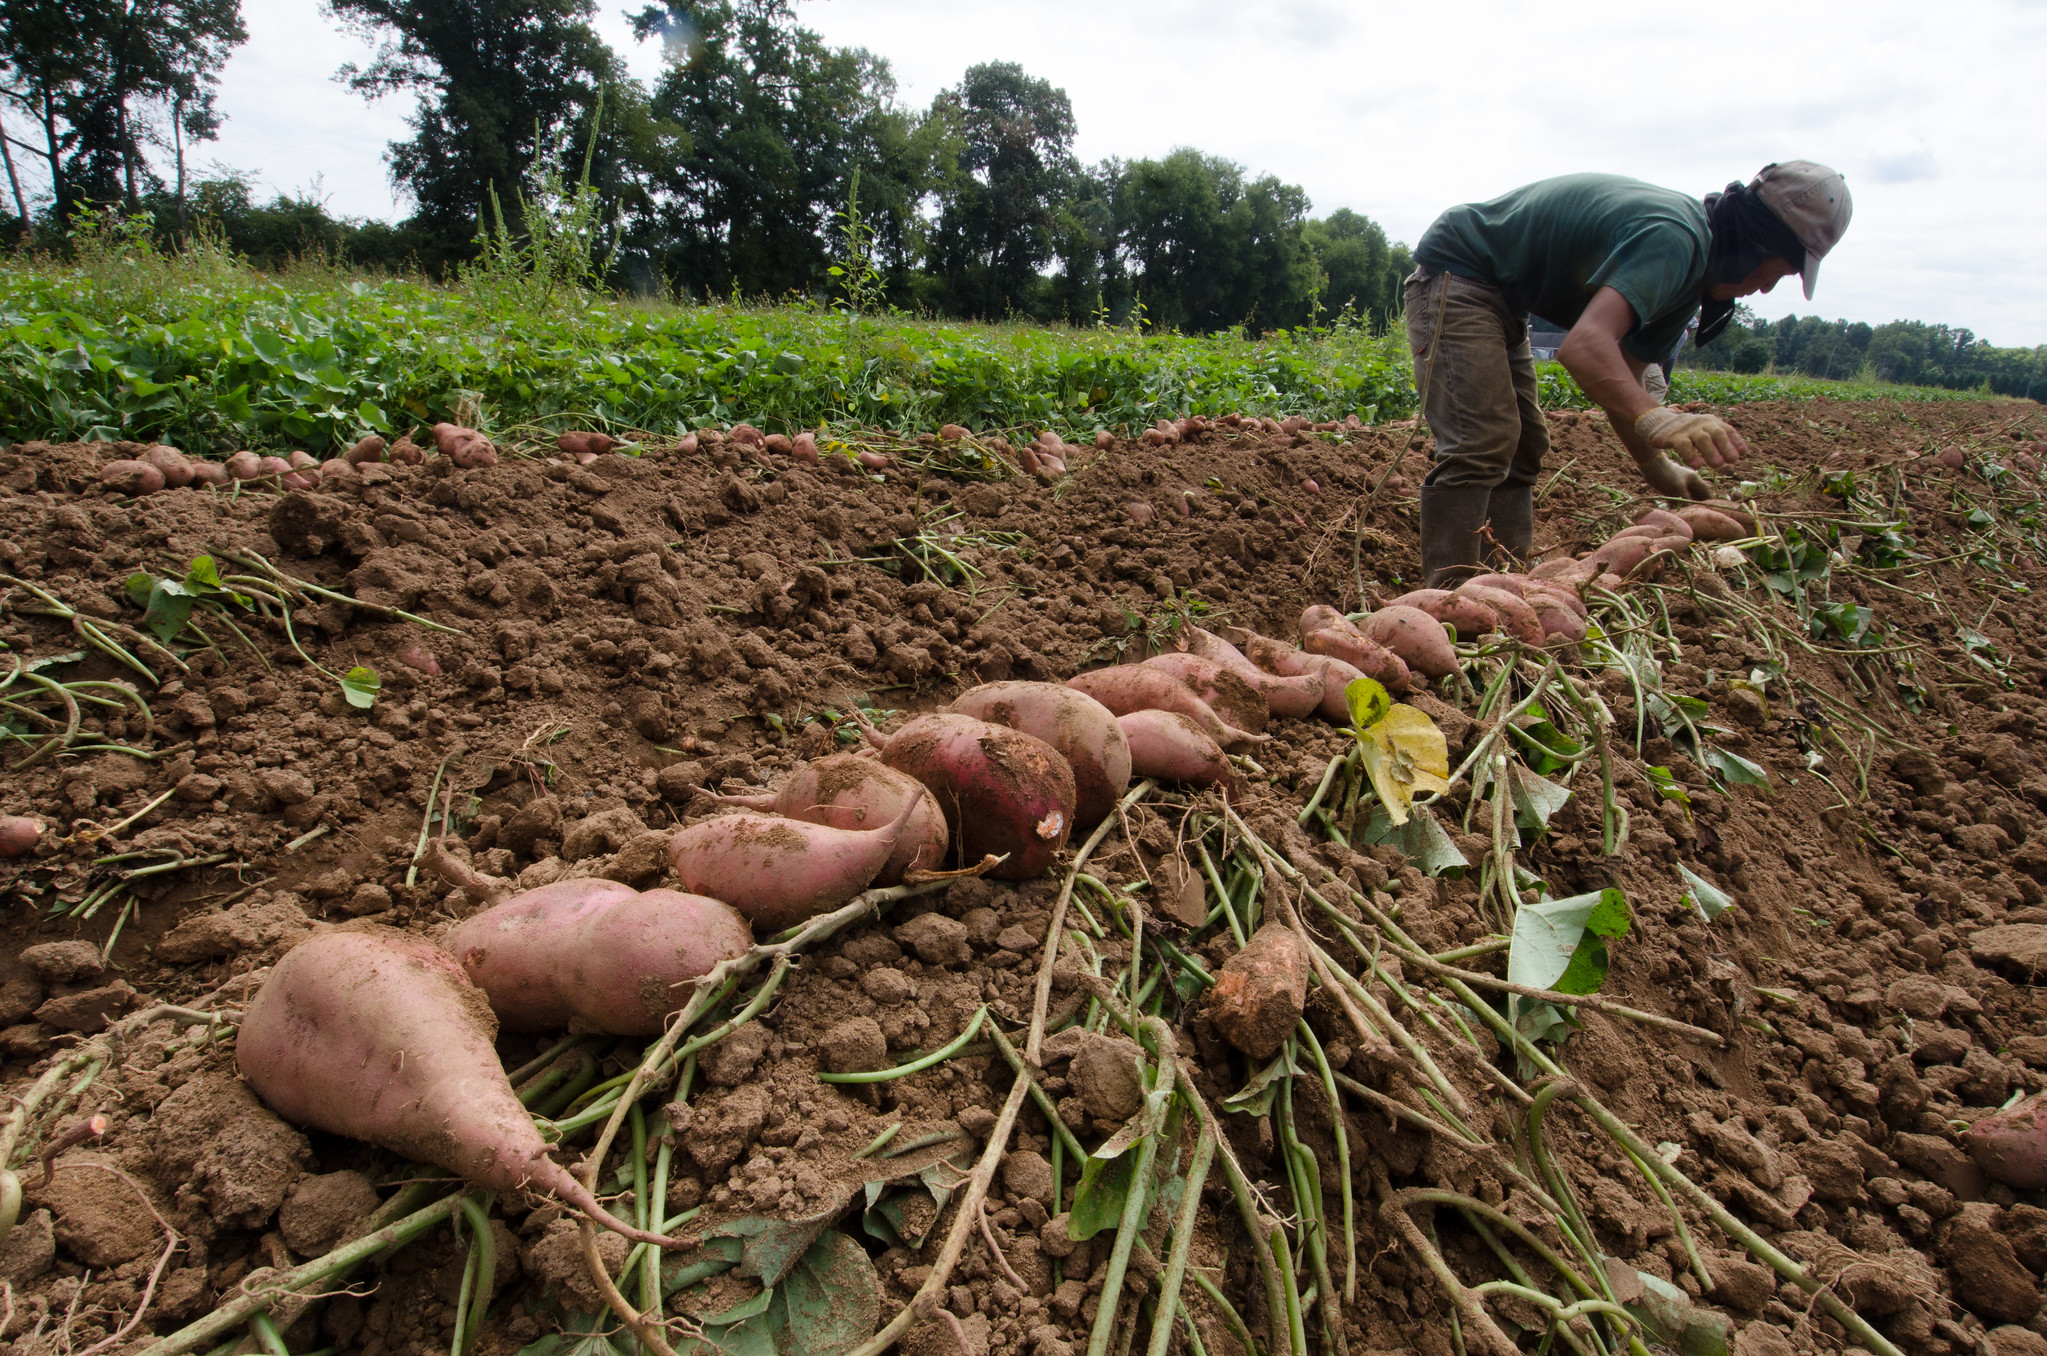 Sweet potatoes in a row with farmer working